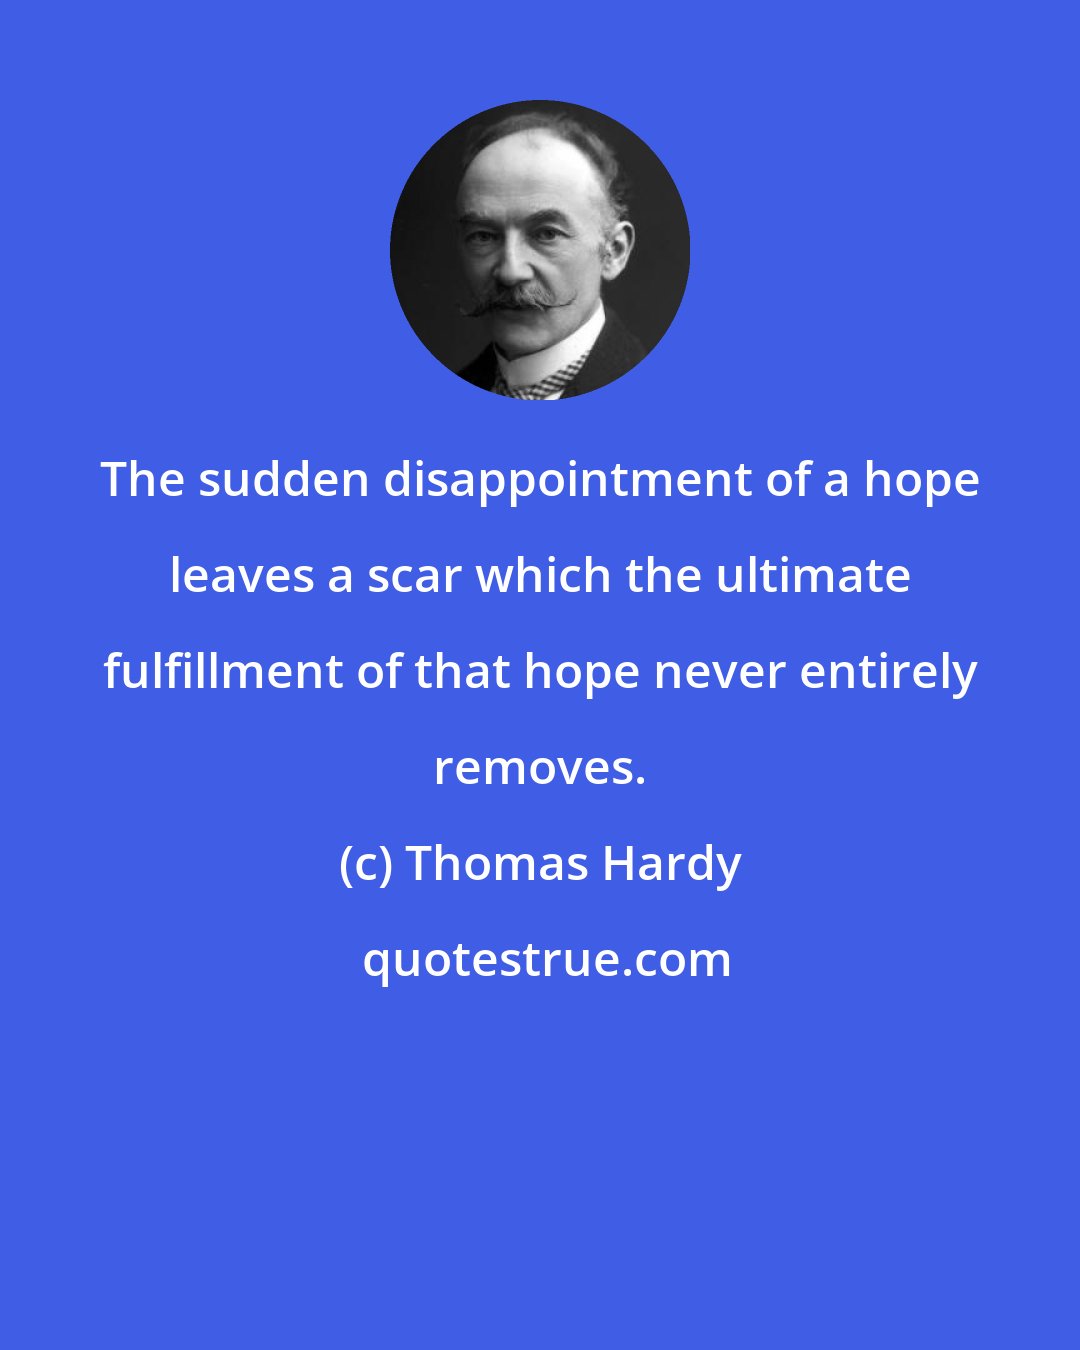 Thomas Hardy: The sudden disappointment of a hope leaves a scar which the ultimate fulfillment of that hope never entirely removes.